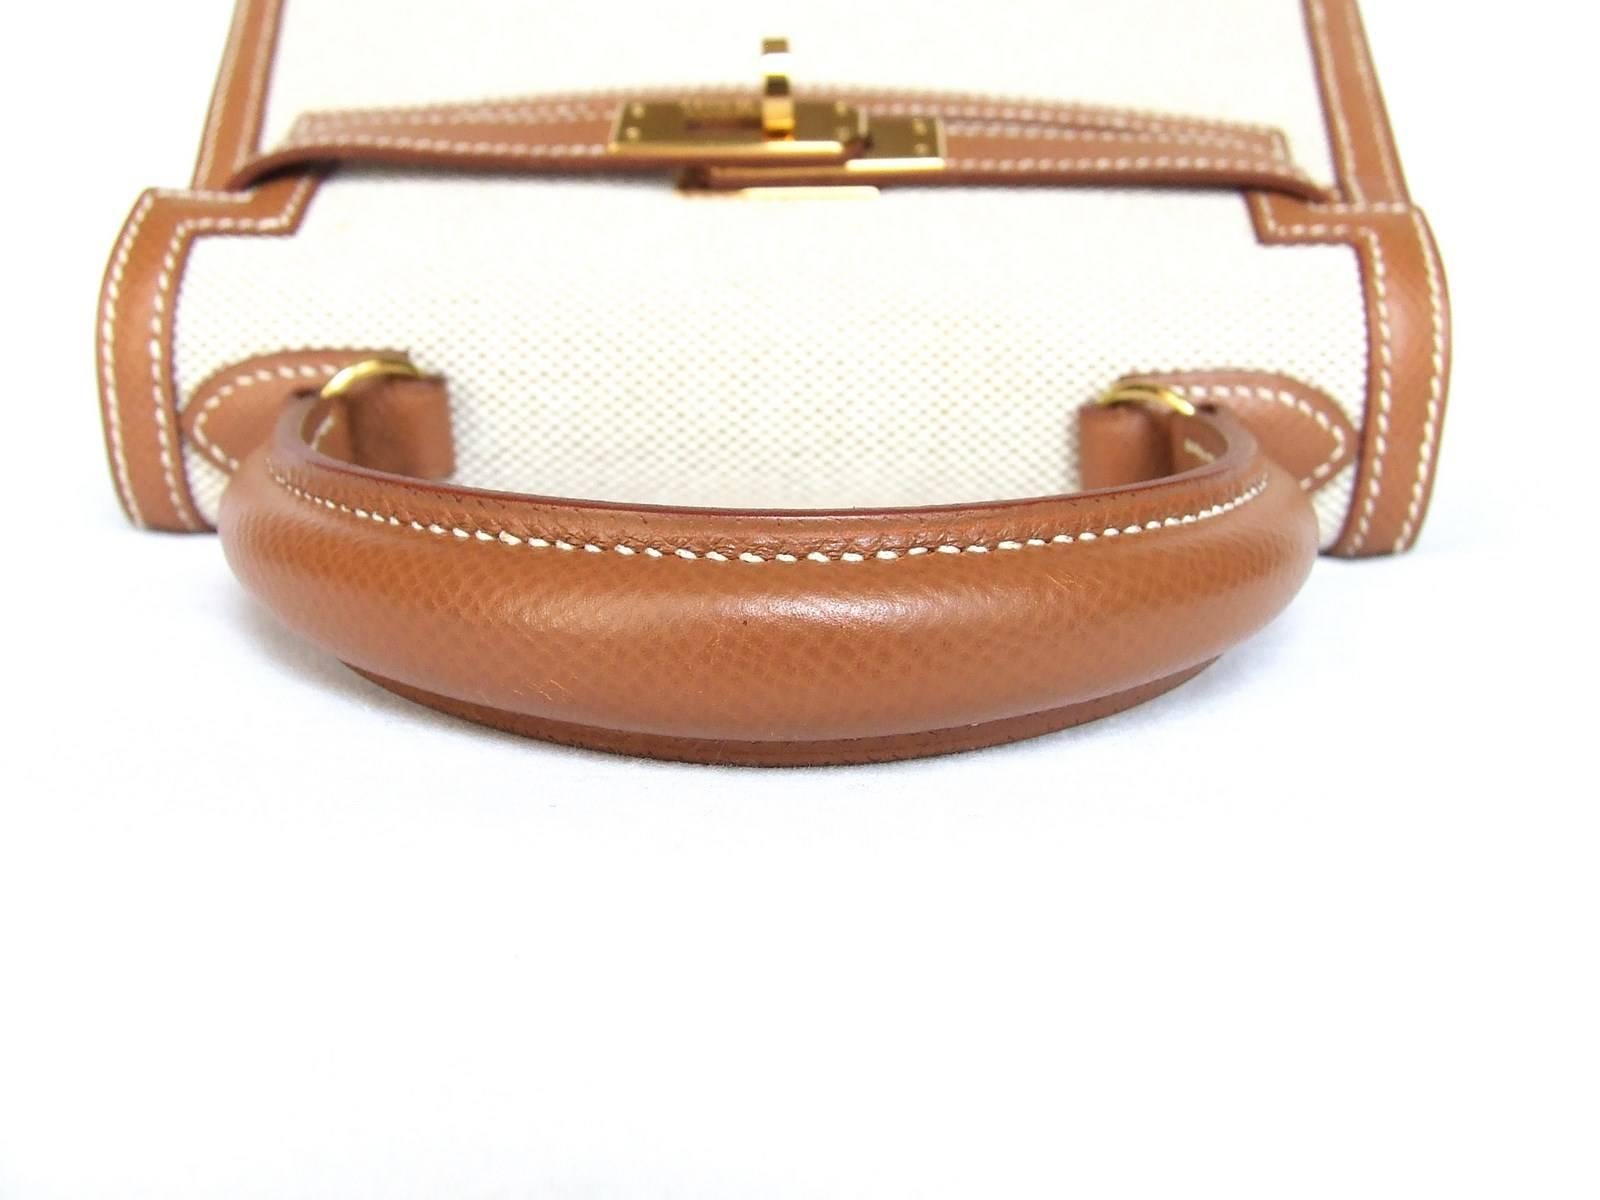 Extremely RARE HERMES Mini Kelly 20 cm Sellier Bag Canvas Gold Leather GHW 2